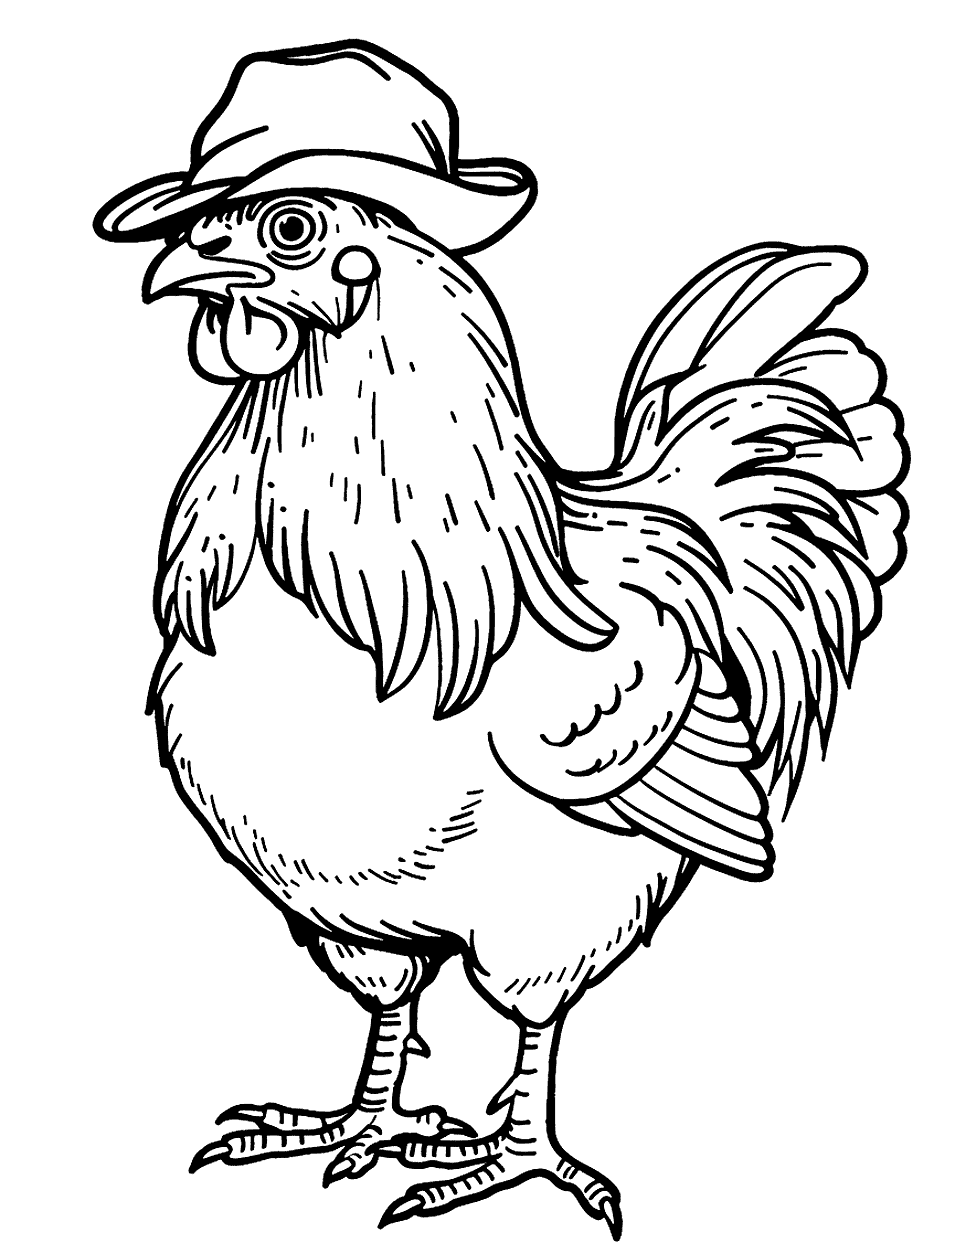 Cool Chicken with a Hat Coloring Page - A cool-looking chicken sporting a stylish hat and a confident pose.